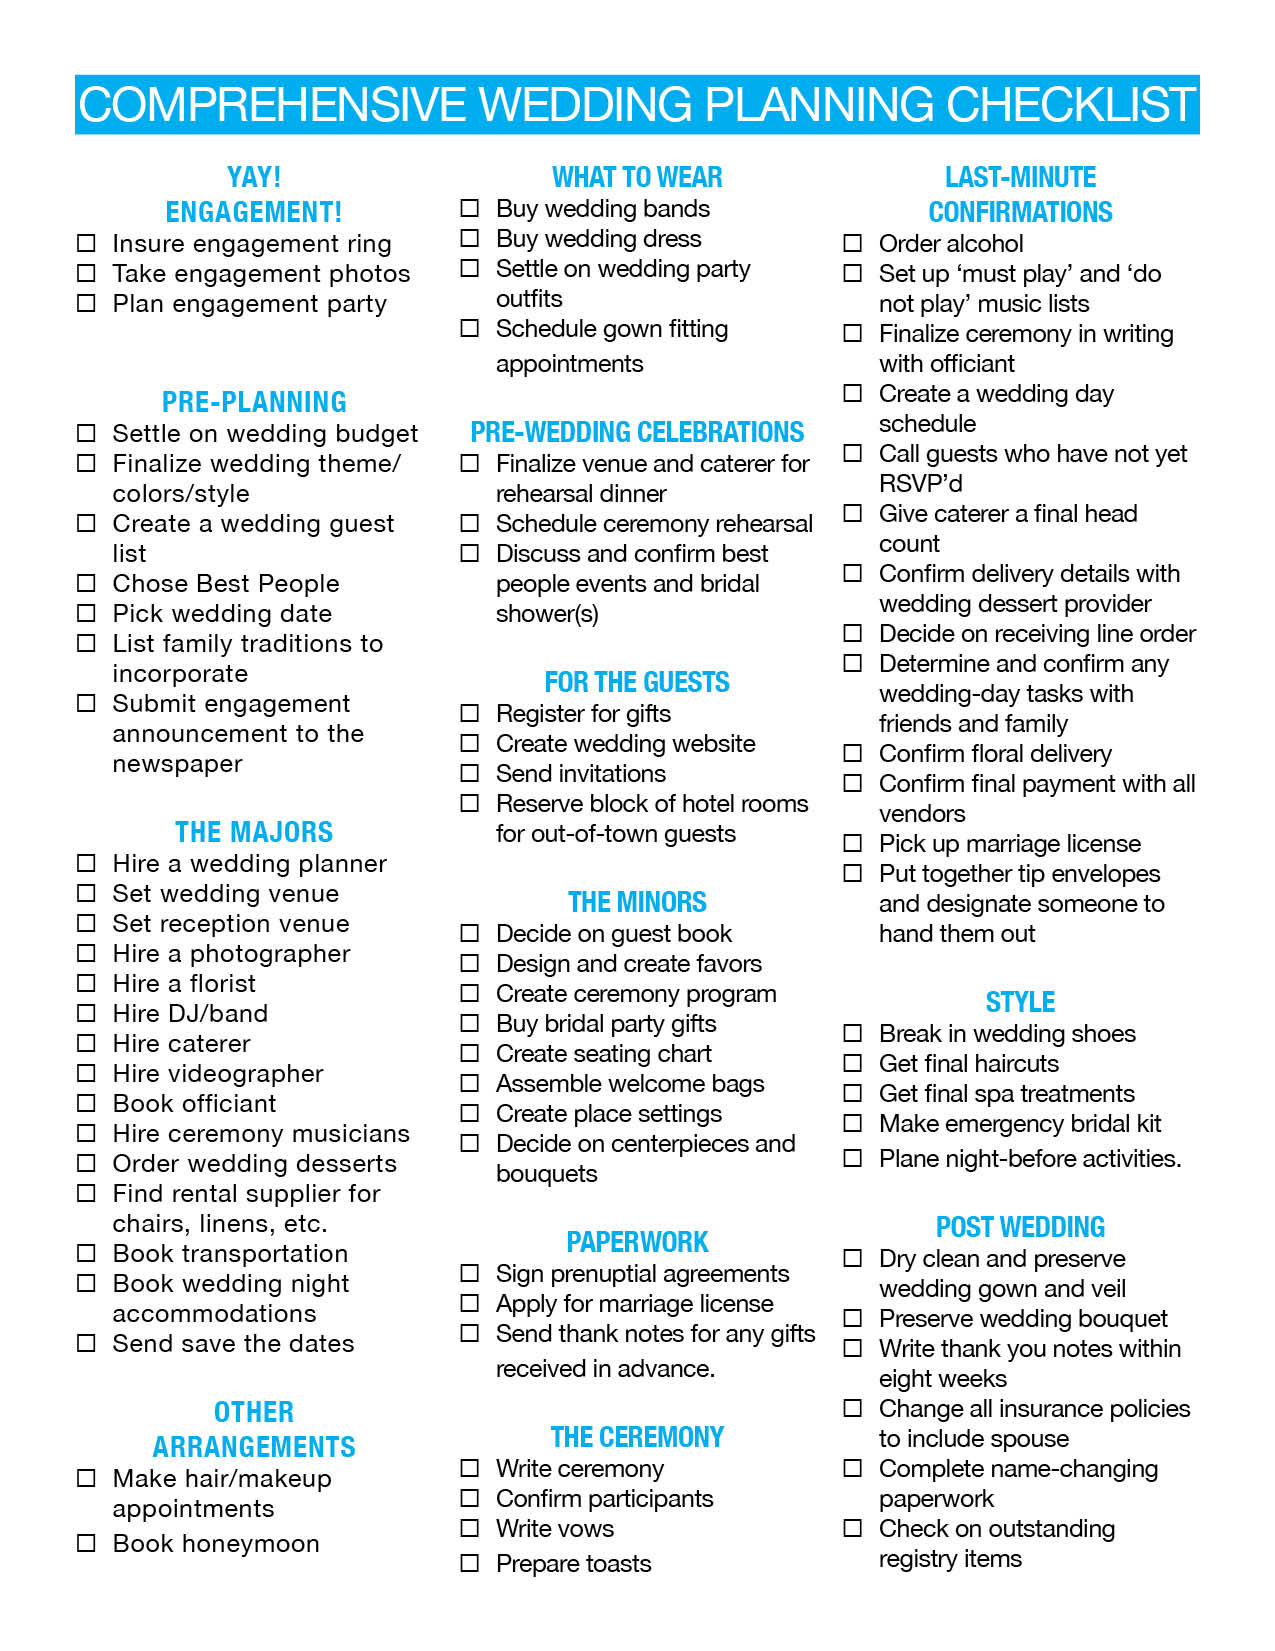 7 Best Images Of Printable Wedding Checklist Wedding Beauty Checklist Wedding Planning